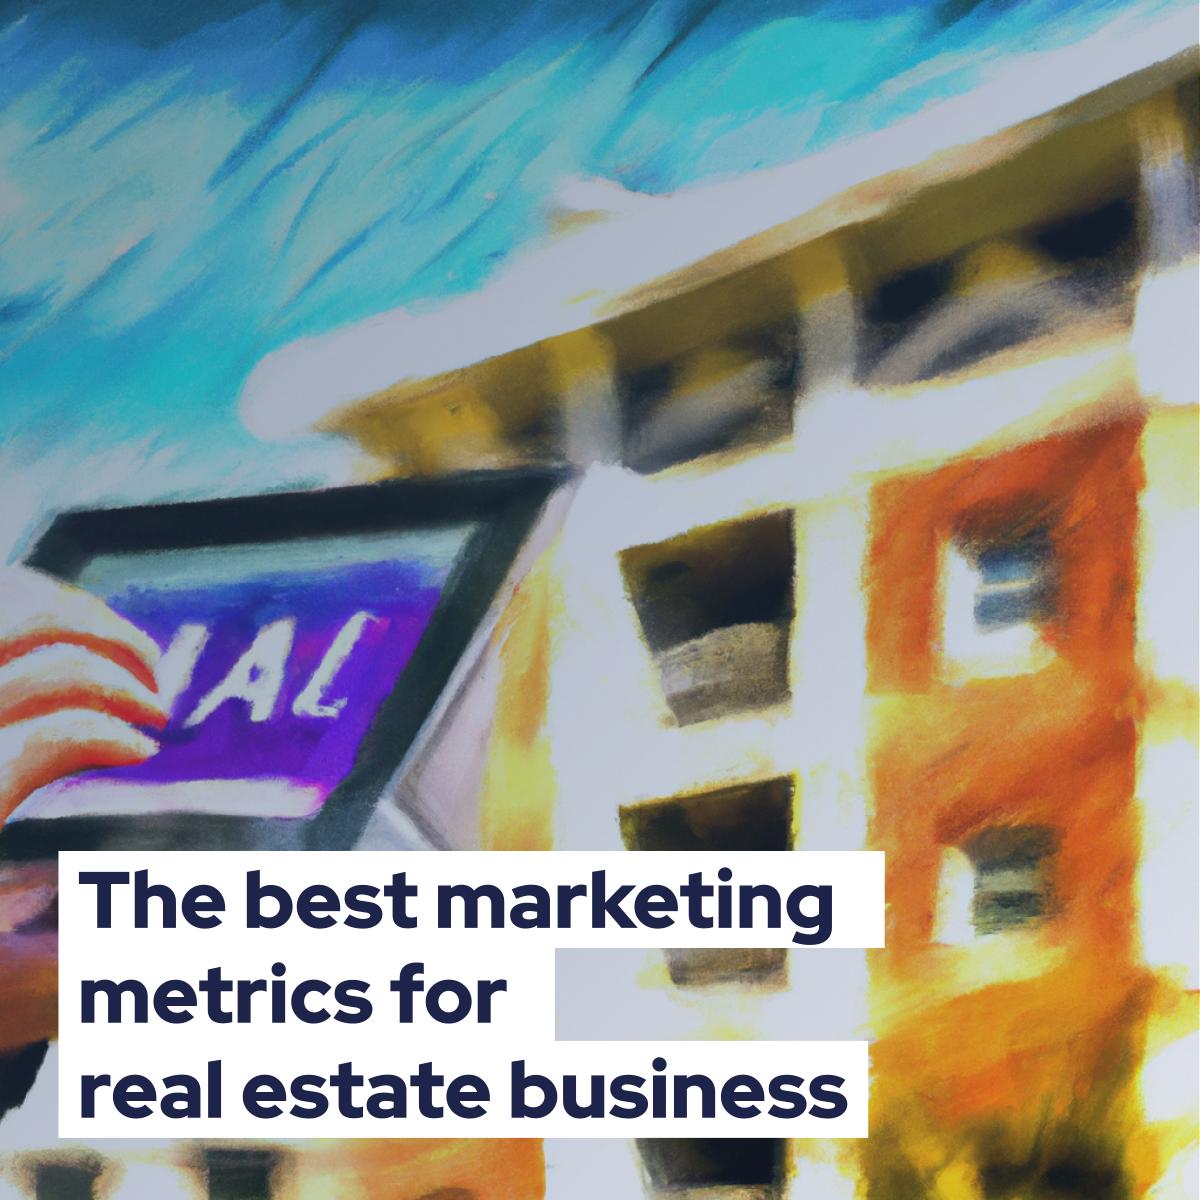 The best marketing metrics for real estate business